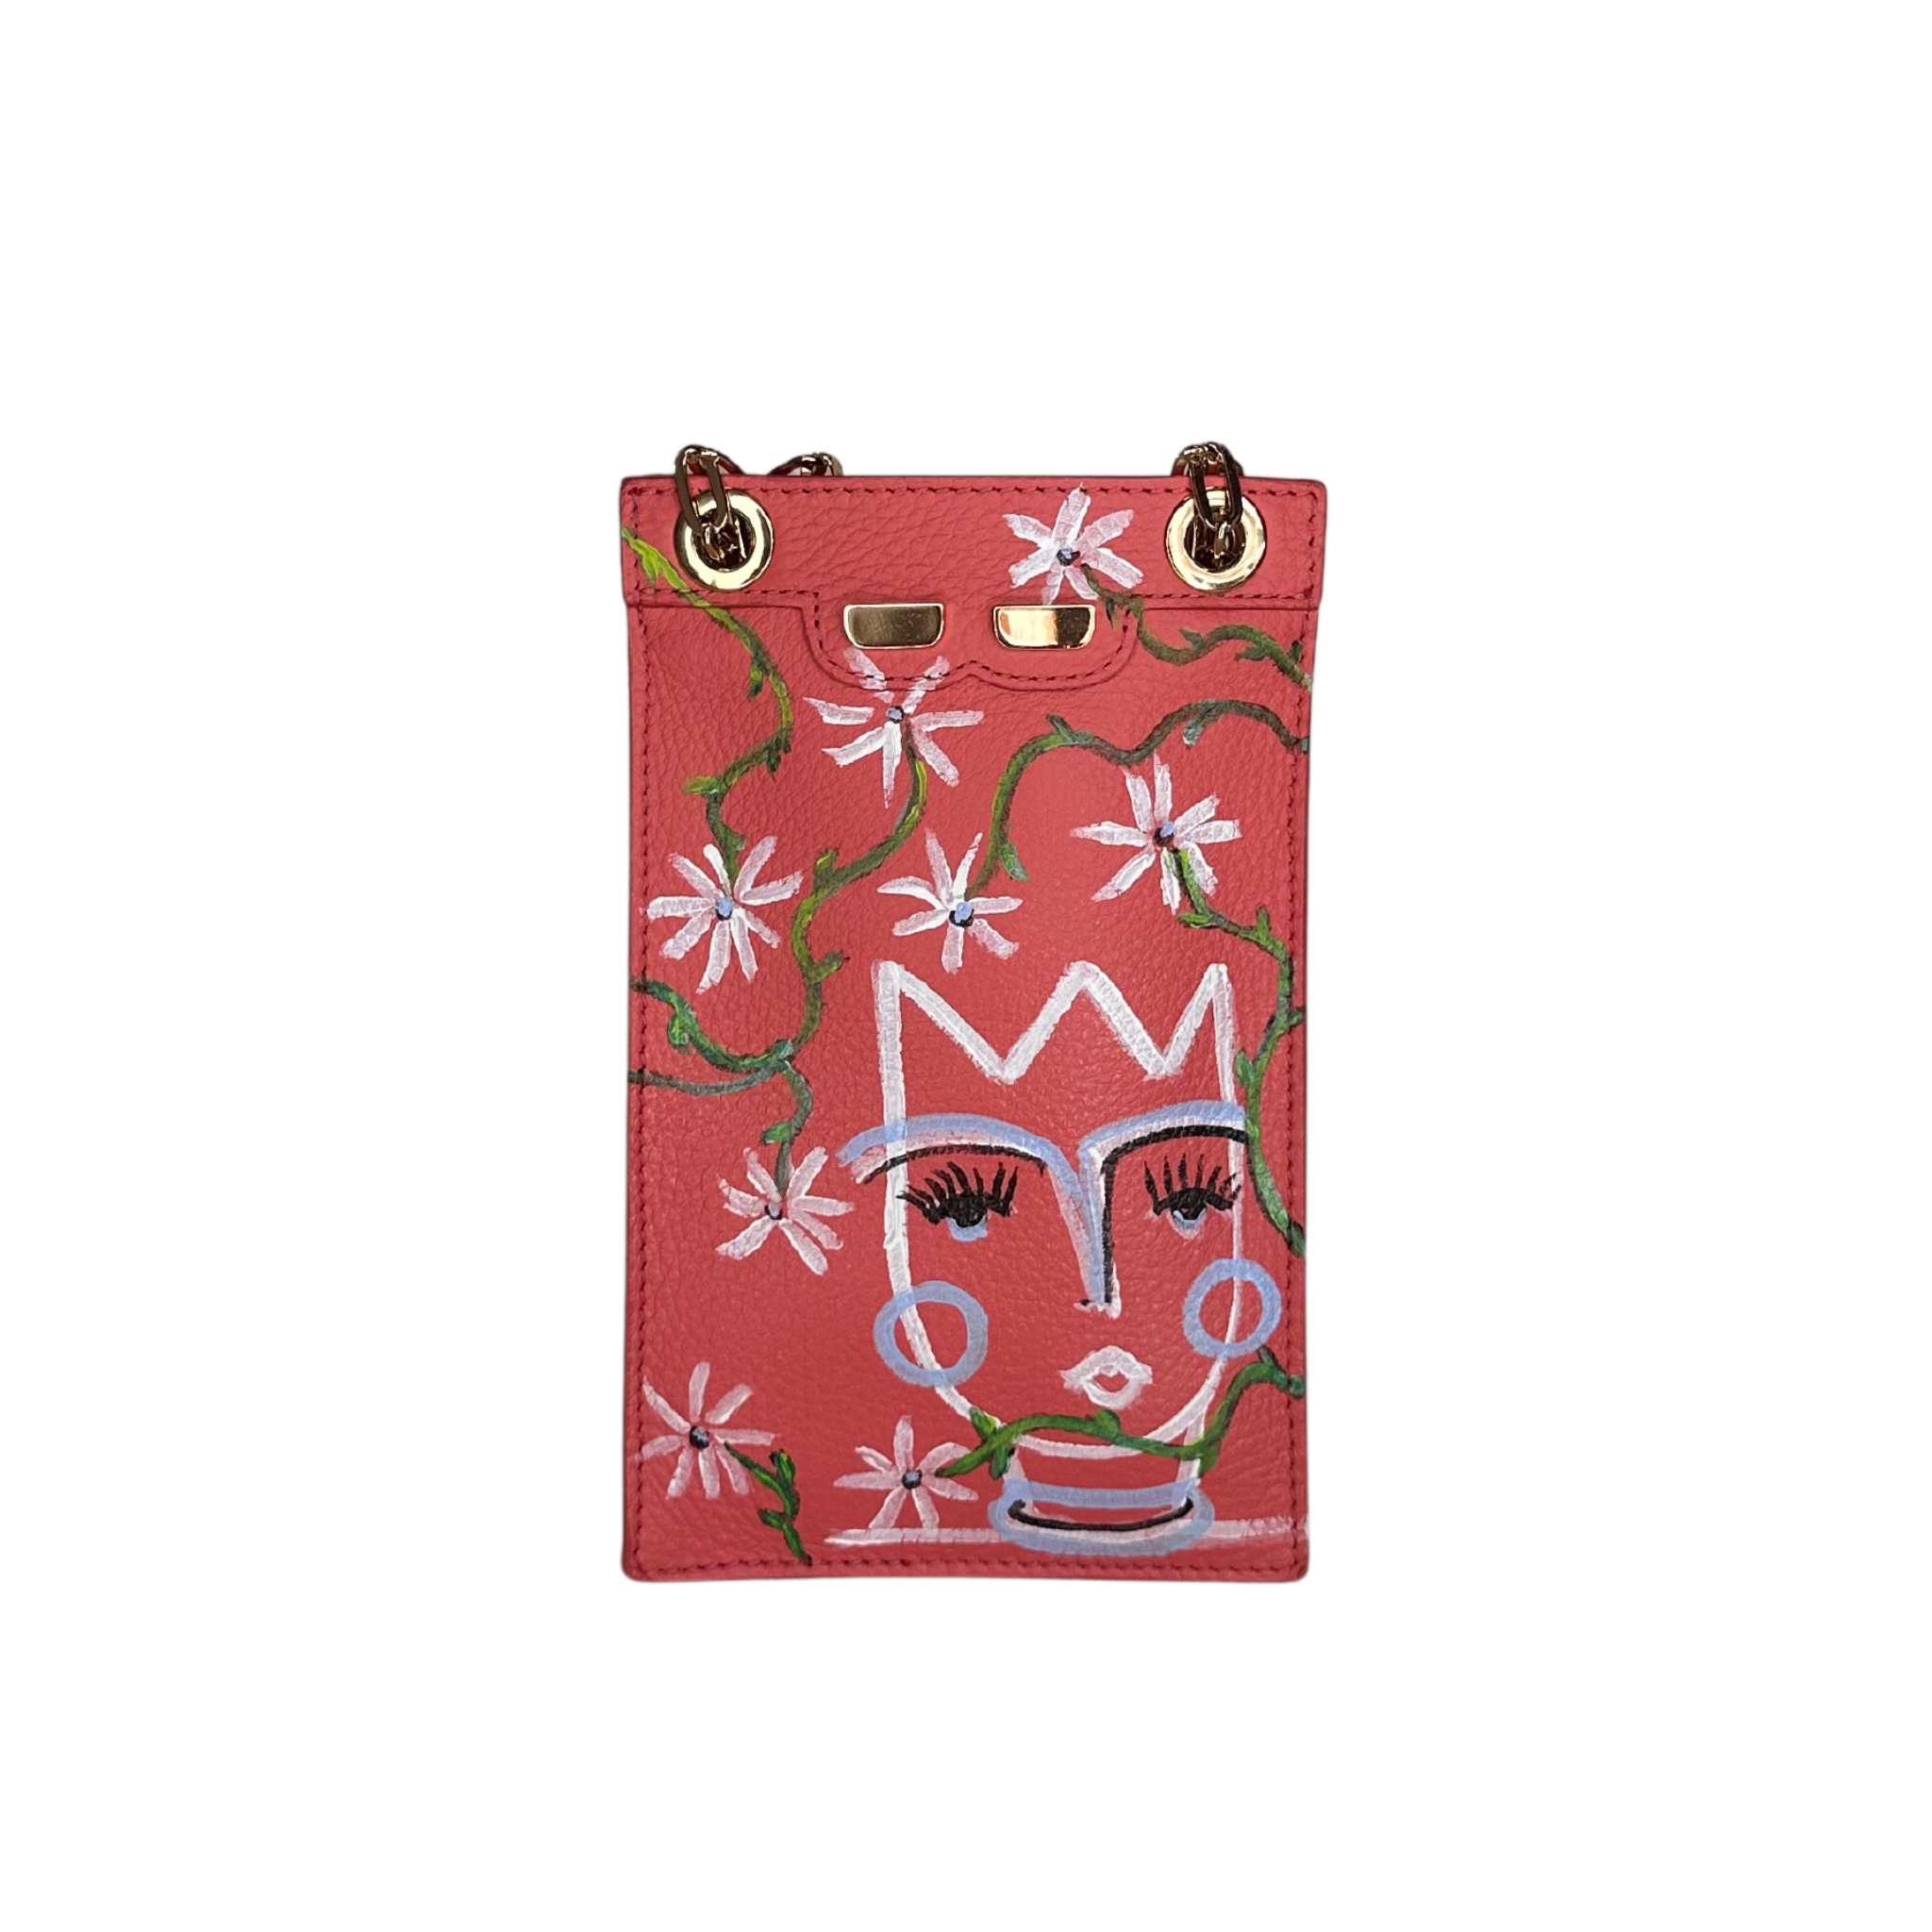 Catherine Cellphone Pouch in Rosa